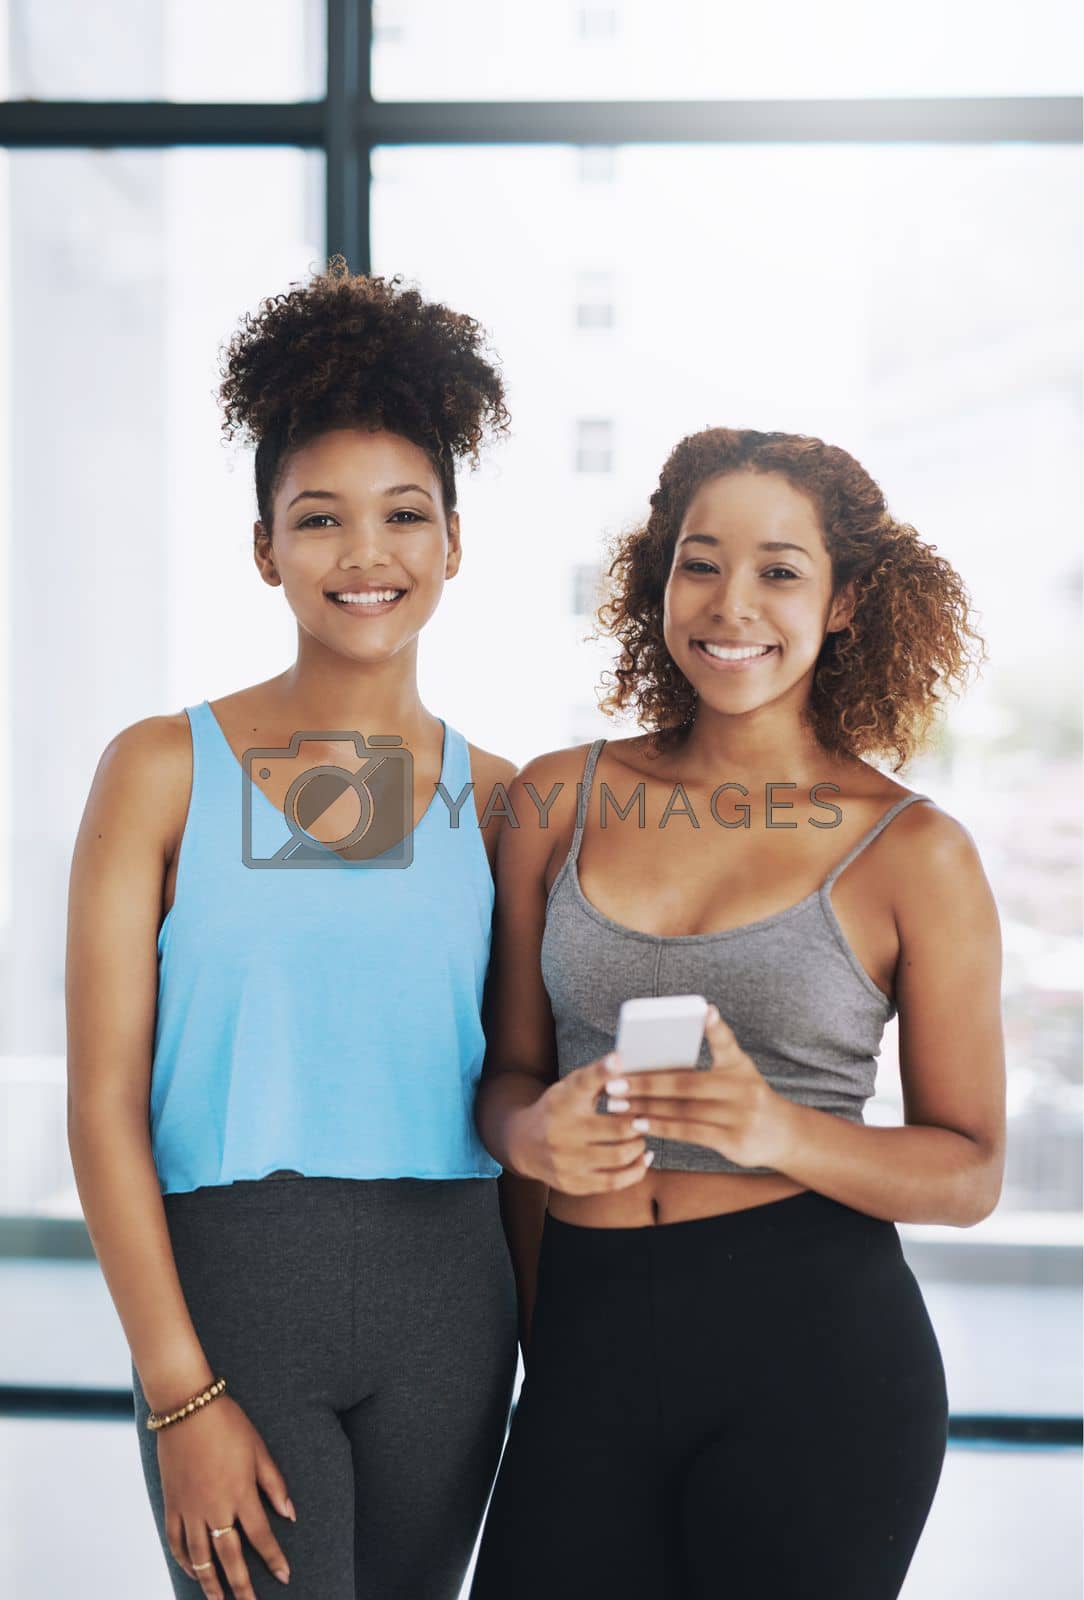 Royalty free image of Yoga keeps us smiling. Cropped portrait of two young women looking at a cellphone after yoga class. by YuriArcurs